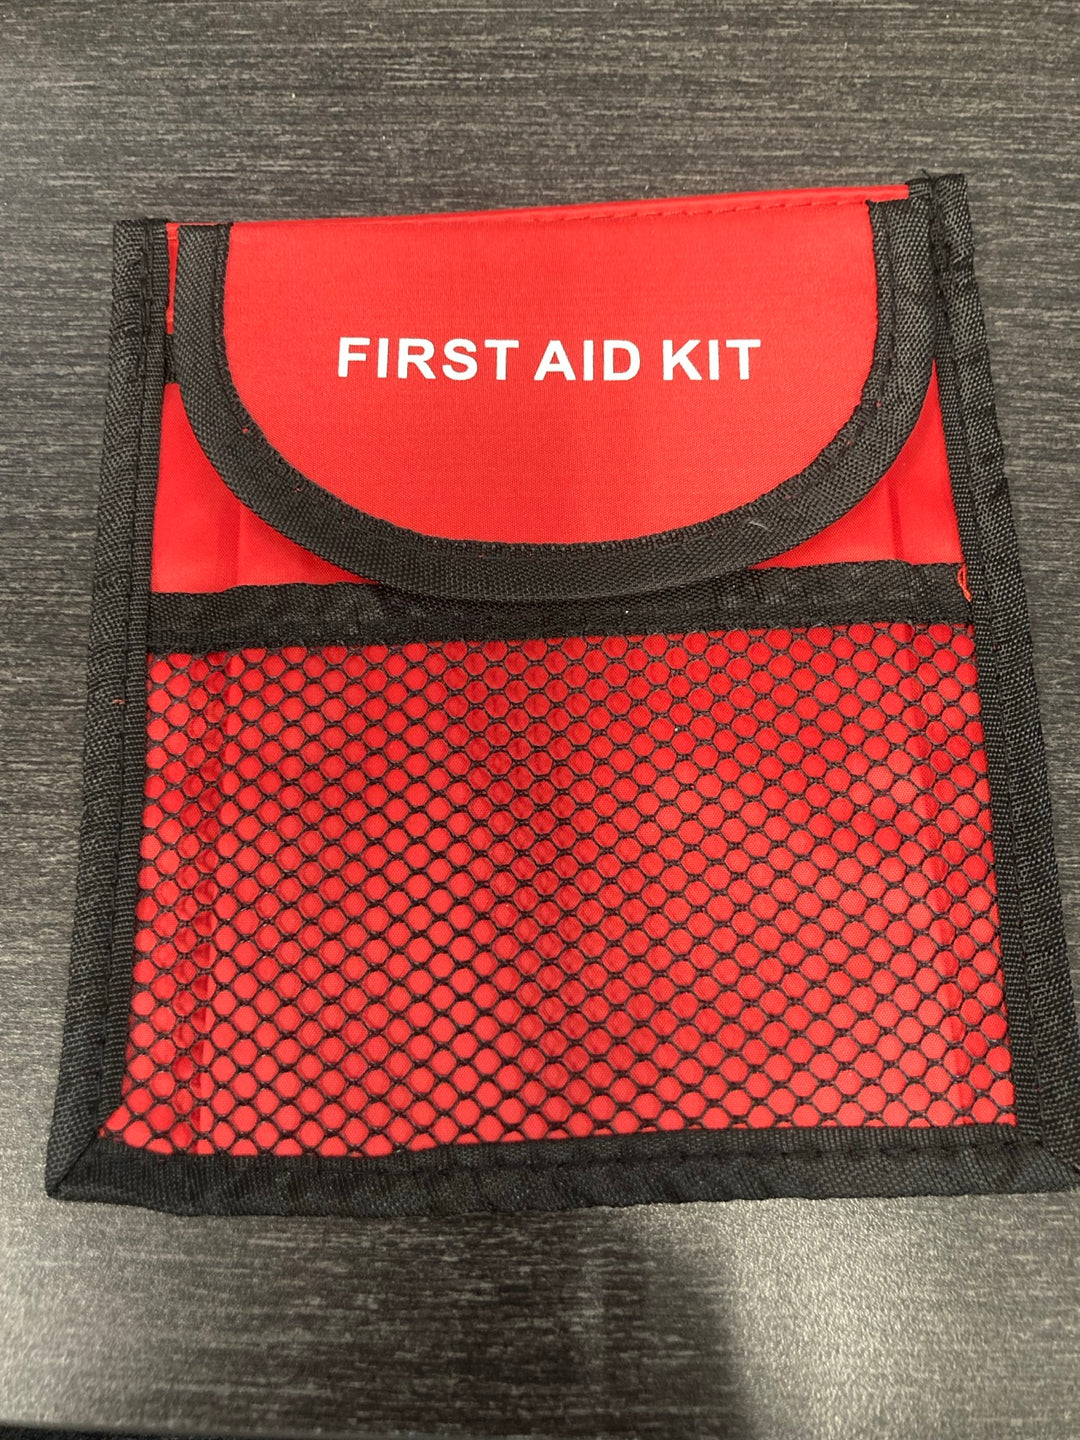 FIRST AID KIT Pouch with Mesh Pocket (6" x 7")